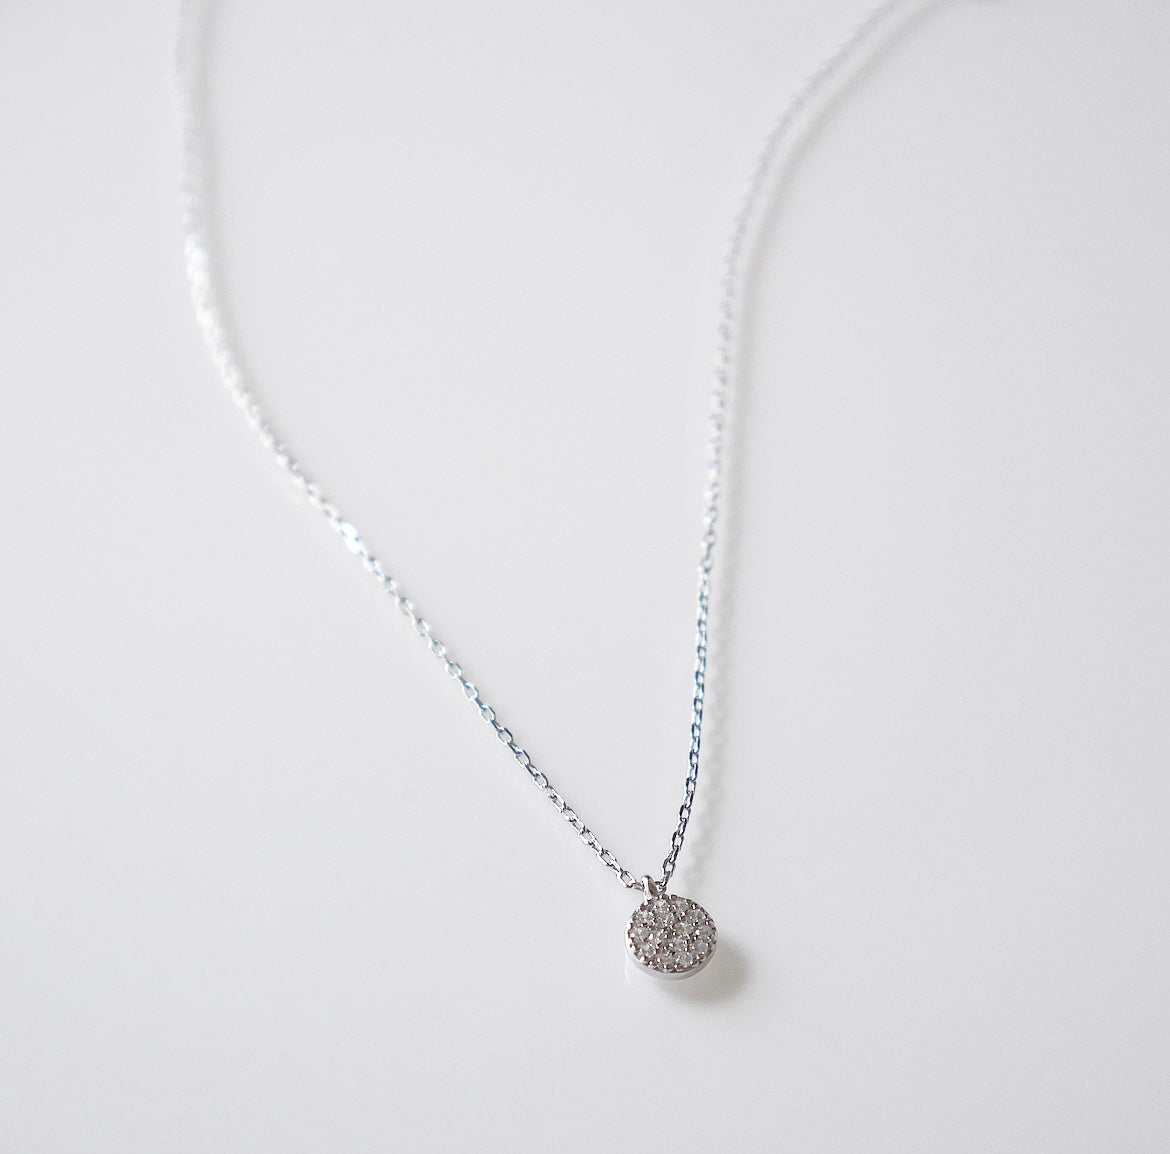 Ocean View Tiny Pave Sparkle Charm Necklace .925 sterling silver